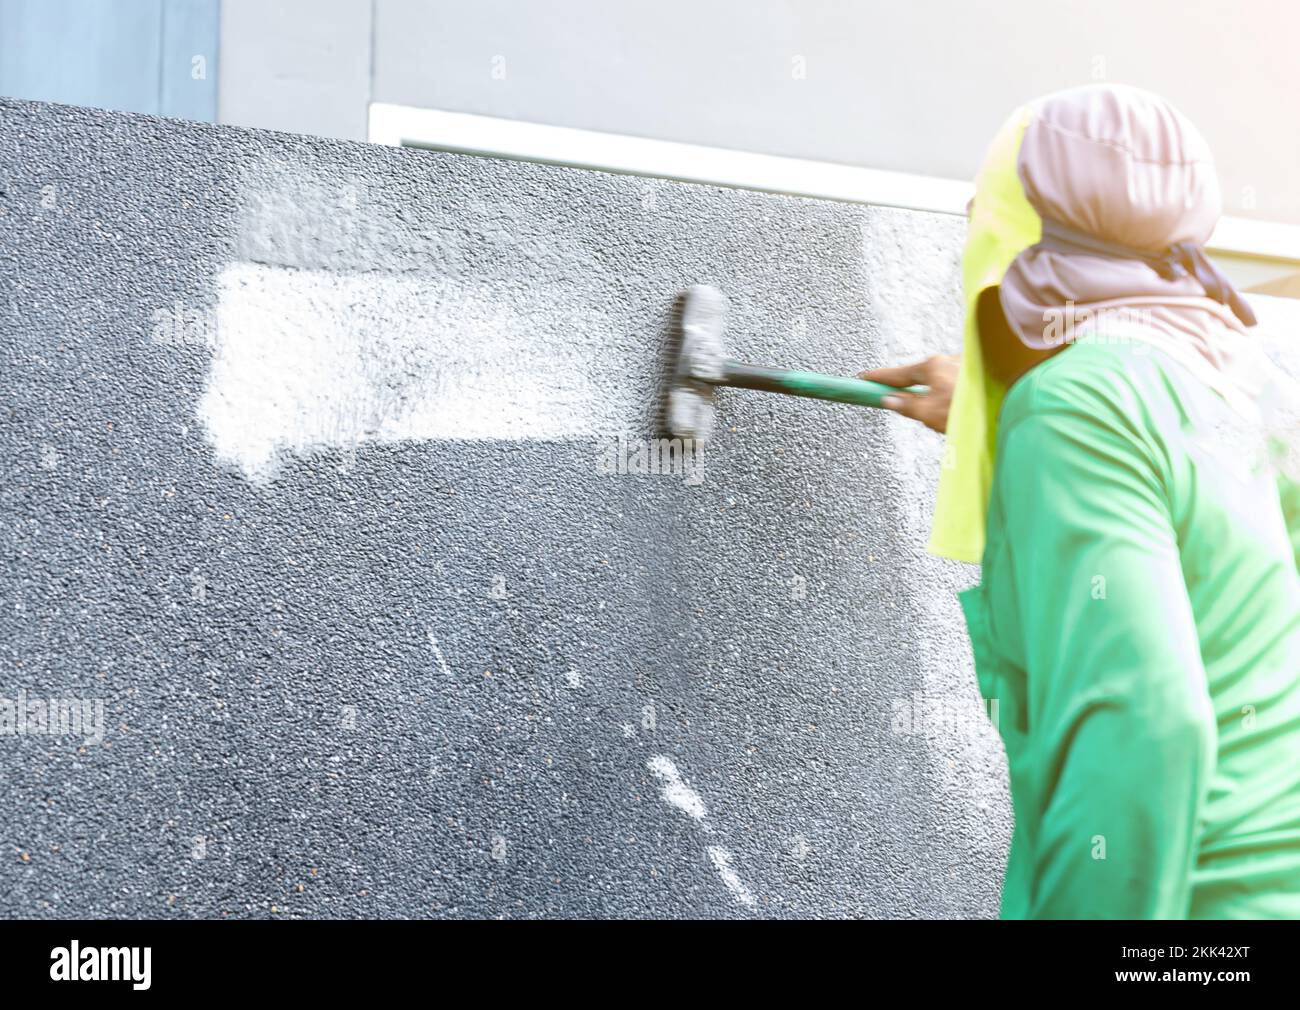 Workers use a brush dipped in hydrochloric acid mixed with water to scrub the surface exposed aggregate finish wall. Stock Photo